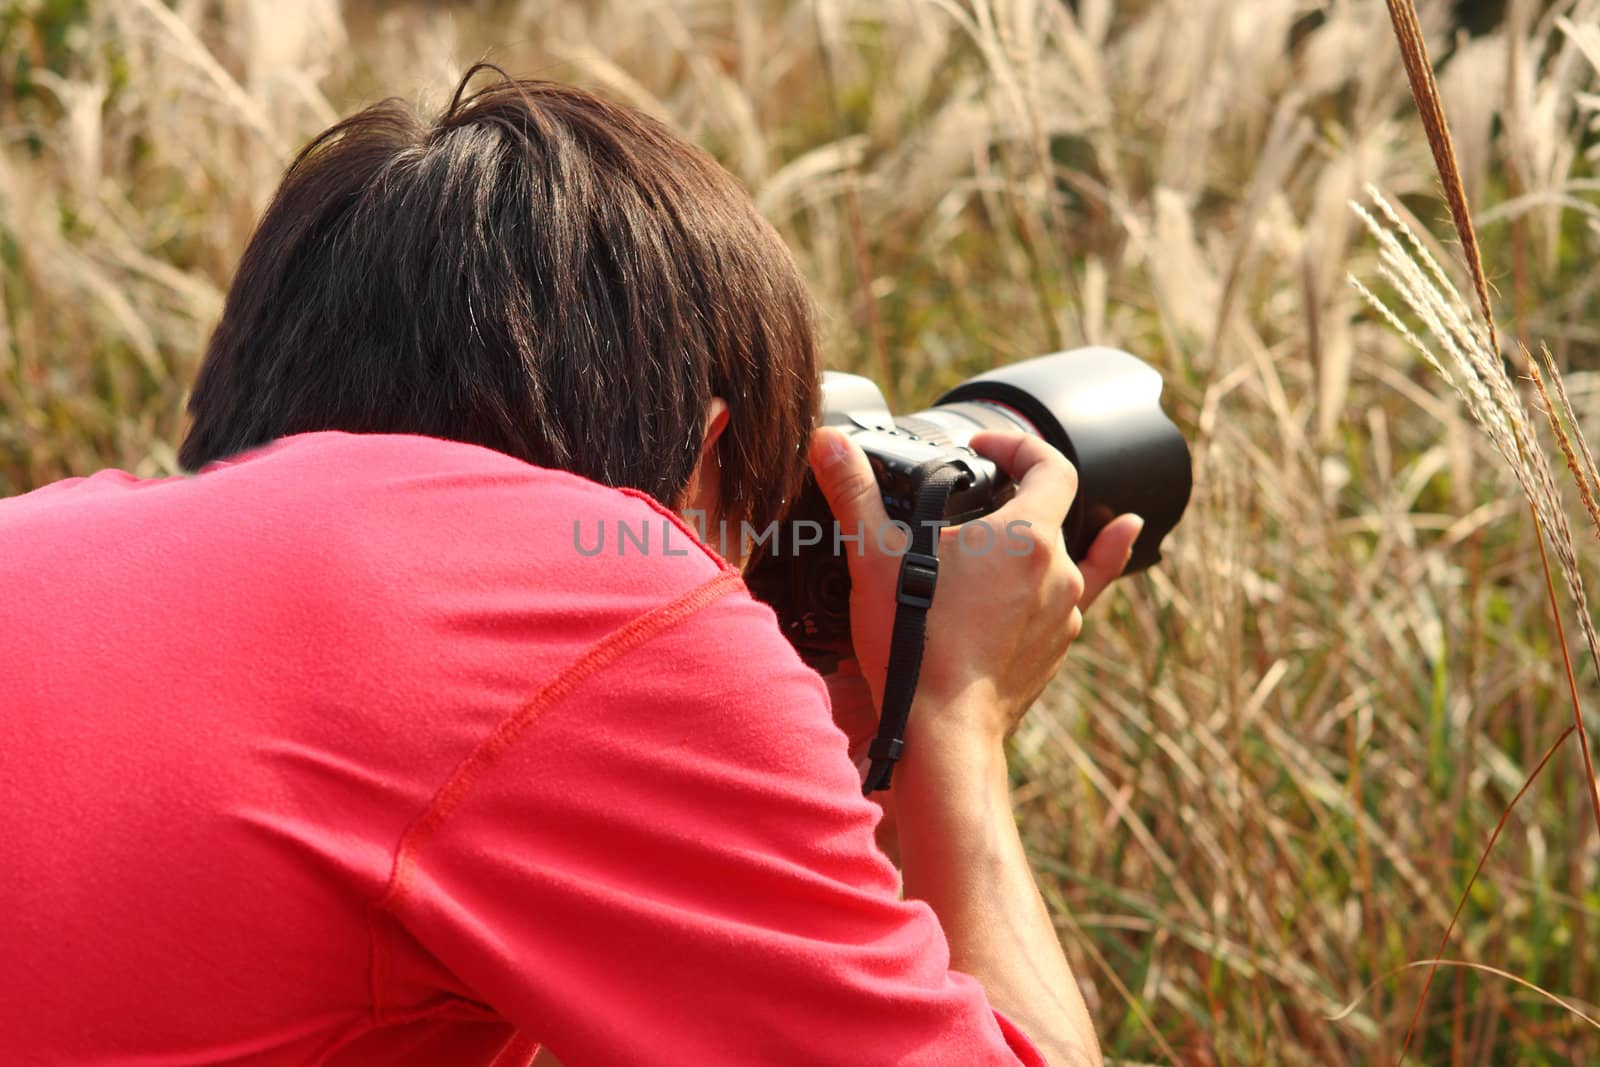 photographer taking photo in country side  by cozyta